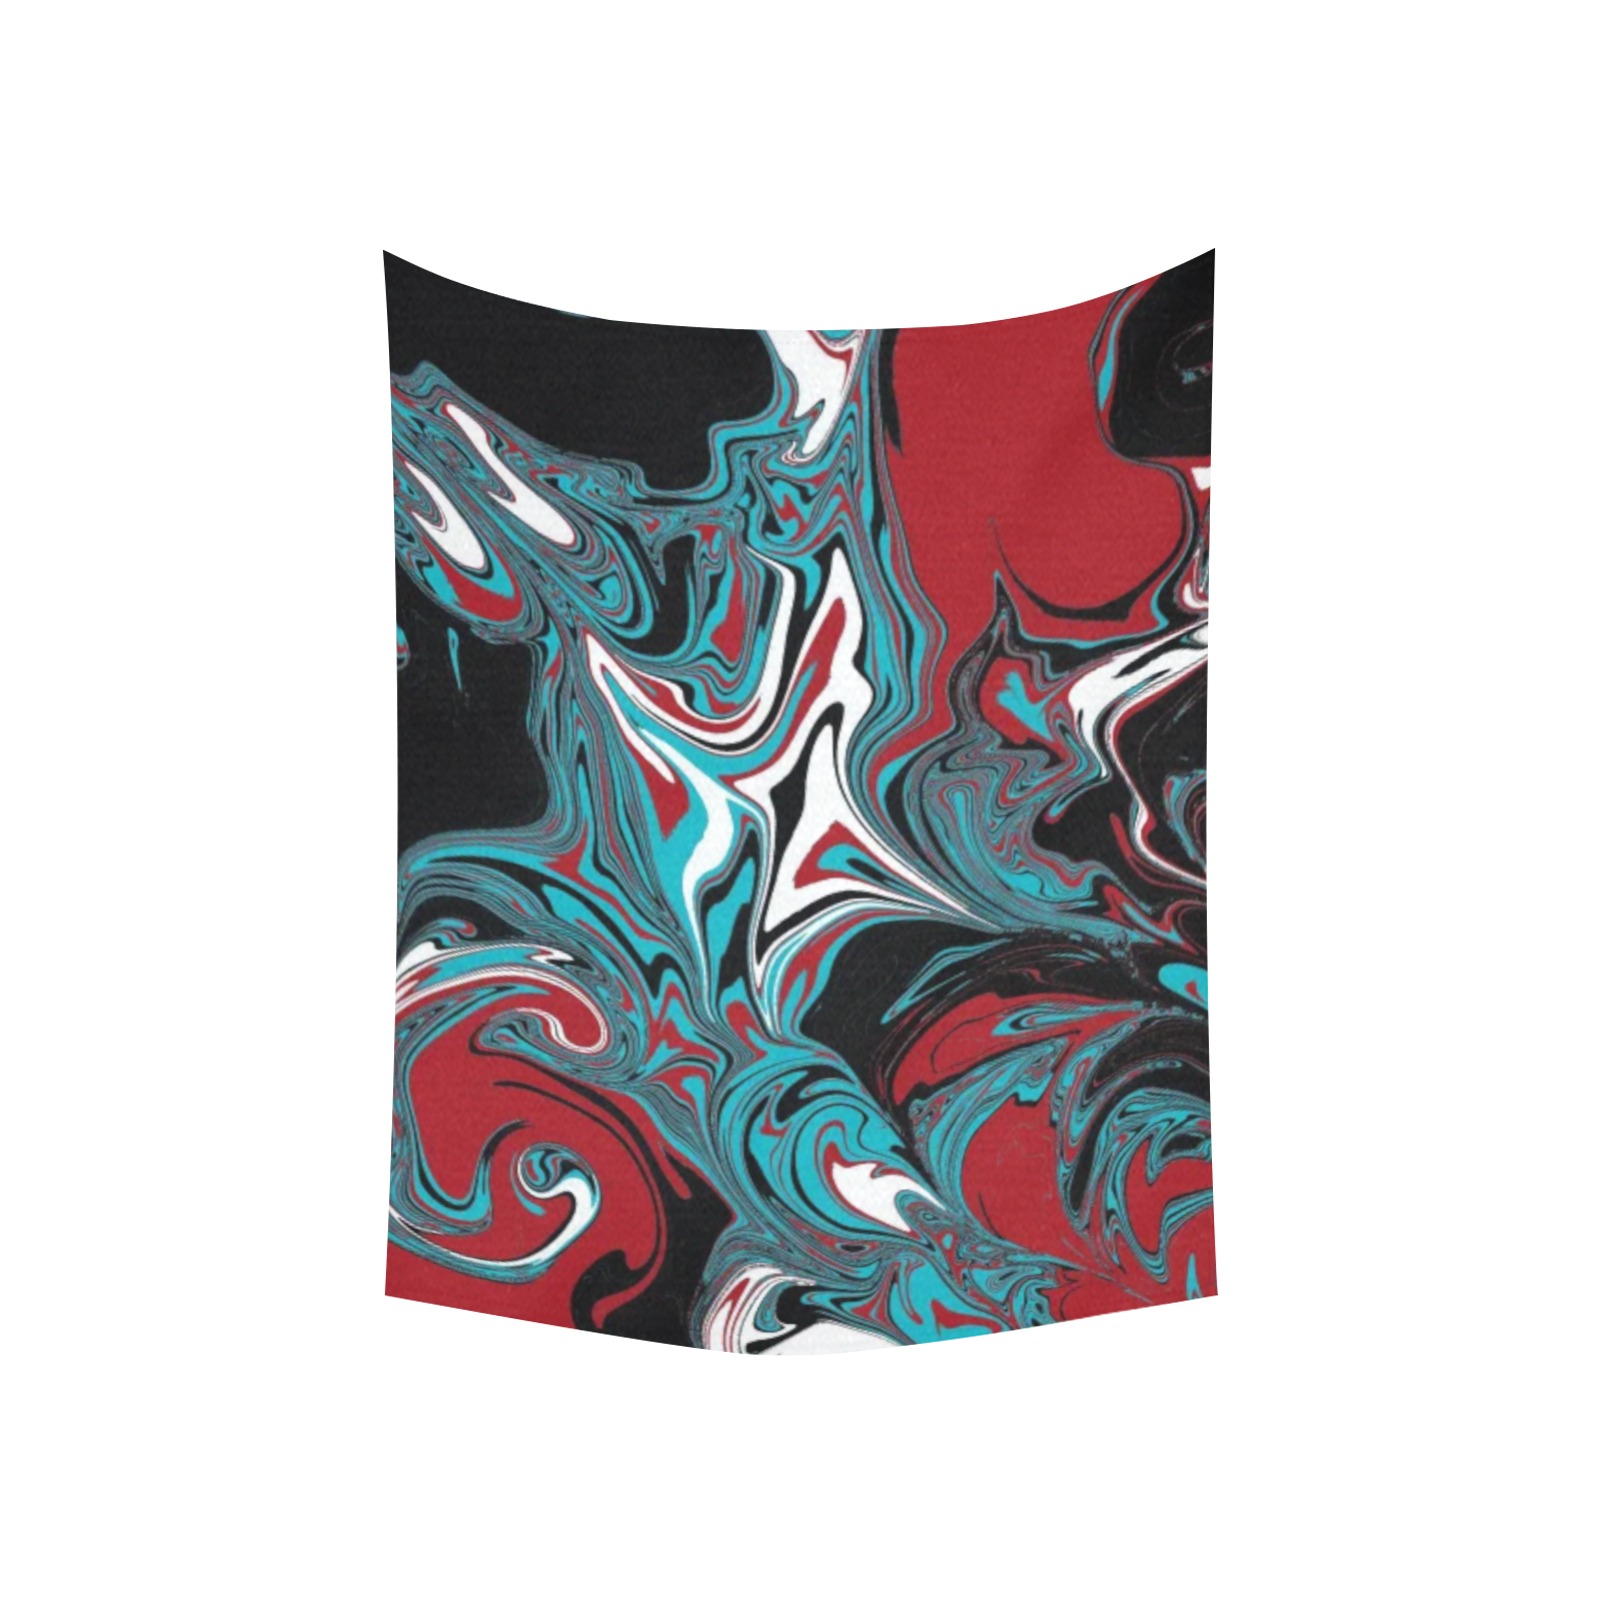 Dark Wave of Colors Polyester Peach Skin Wall Tapestry 30"x 40"